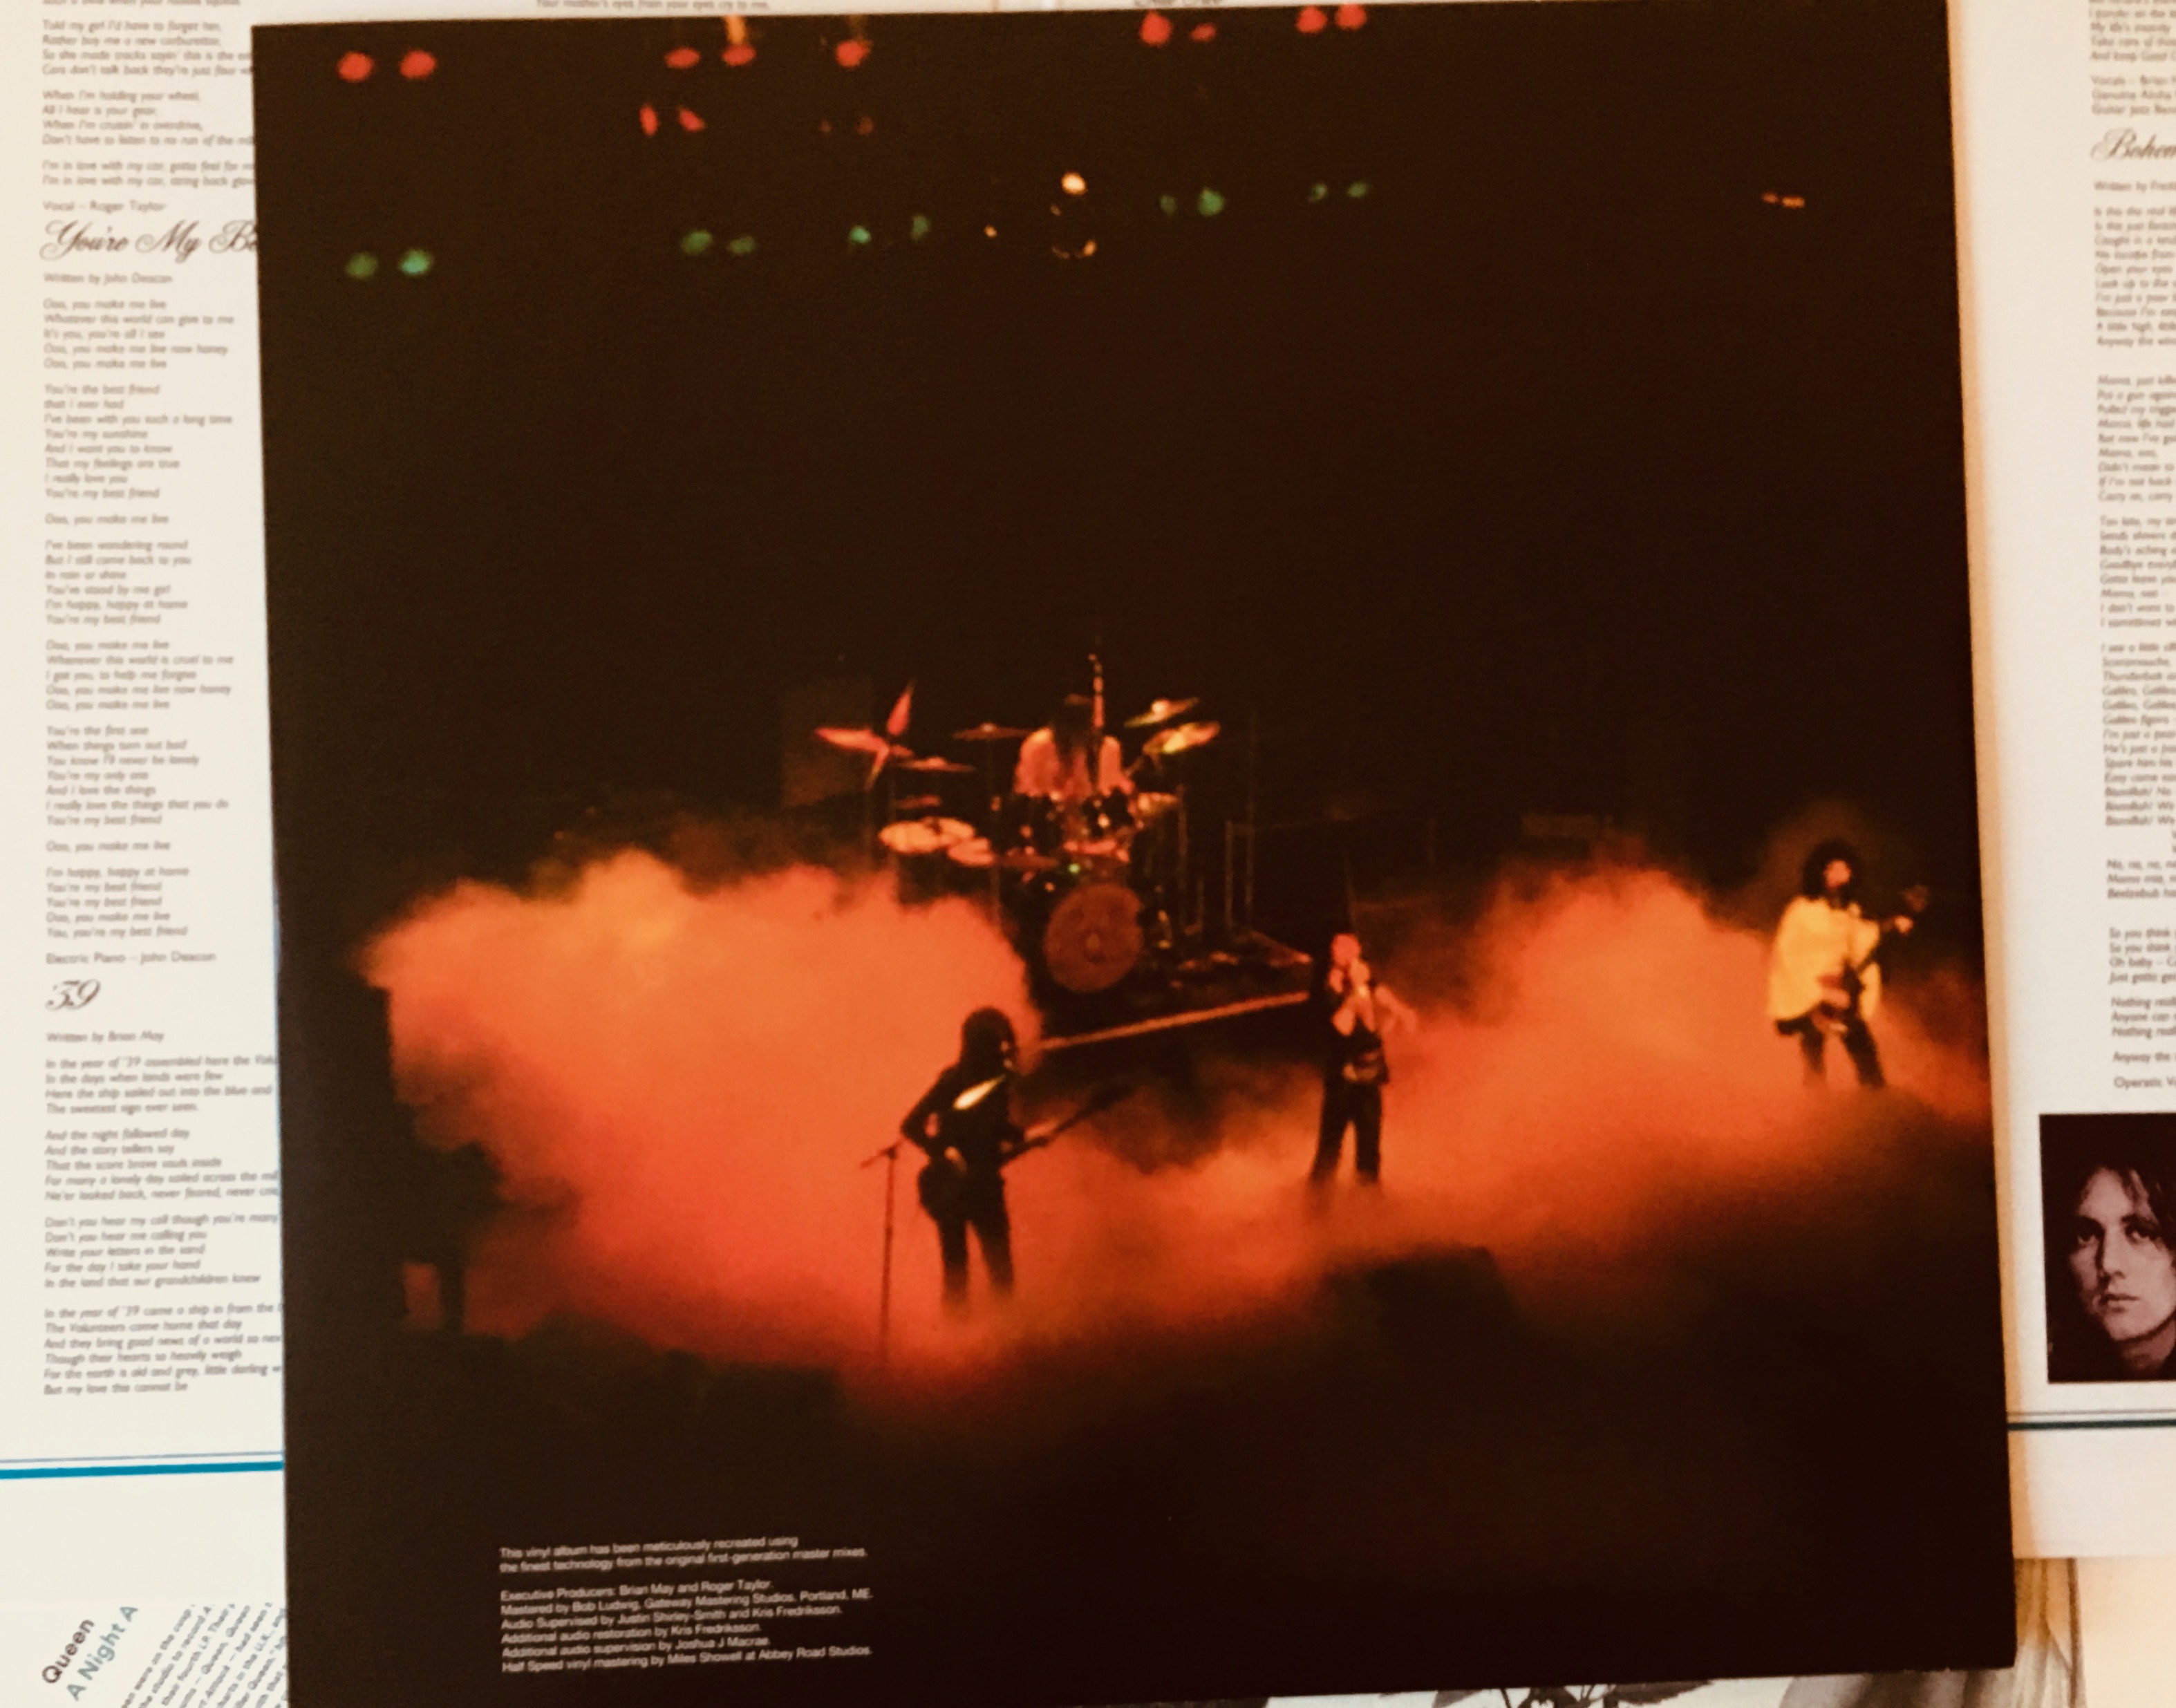 Geek insider, geekinsider, geekinsider. Com,, vinyl me, please november edition: queen 'a night at the opera', entertainment